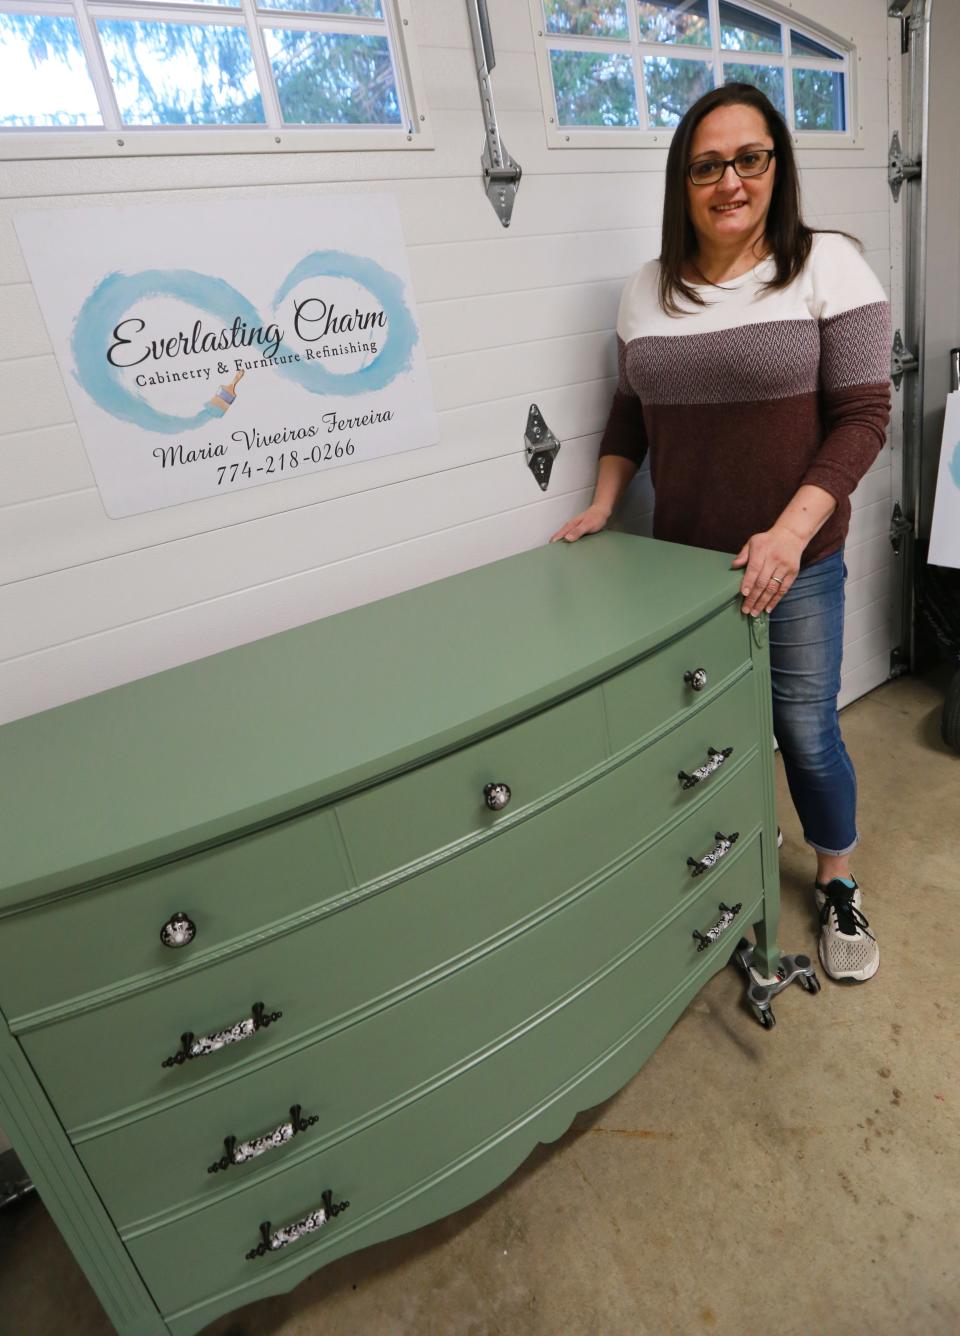 Maria Viveiros Ferreira, owner of Everlasting Charm Cabinetry & Furniture Refinishing, shows a recently completed furniture piece  in her shop on Thursday, April 28, 2022.